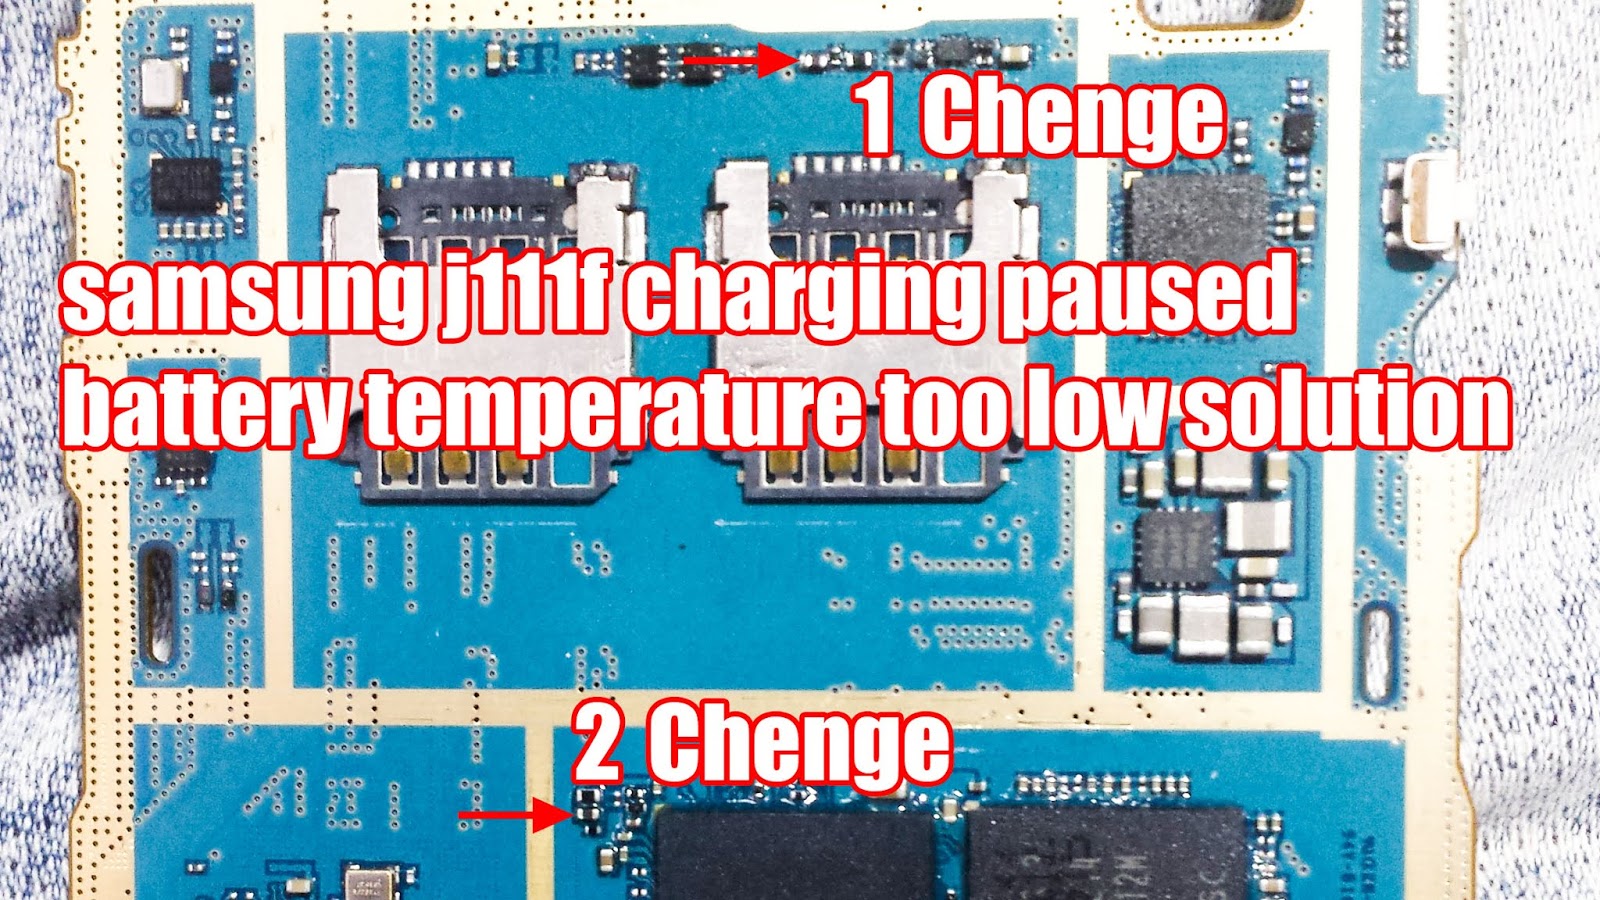 Samsung J111f Charging Paused Battery Temperature Too Low Solution Frimwer